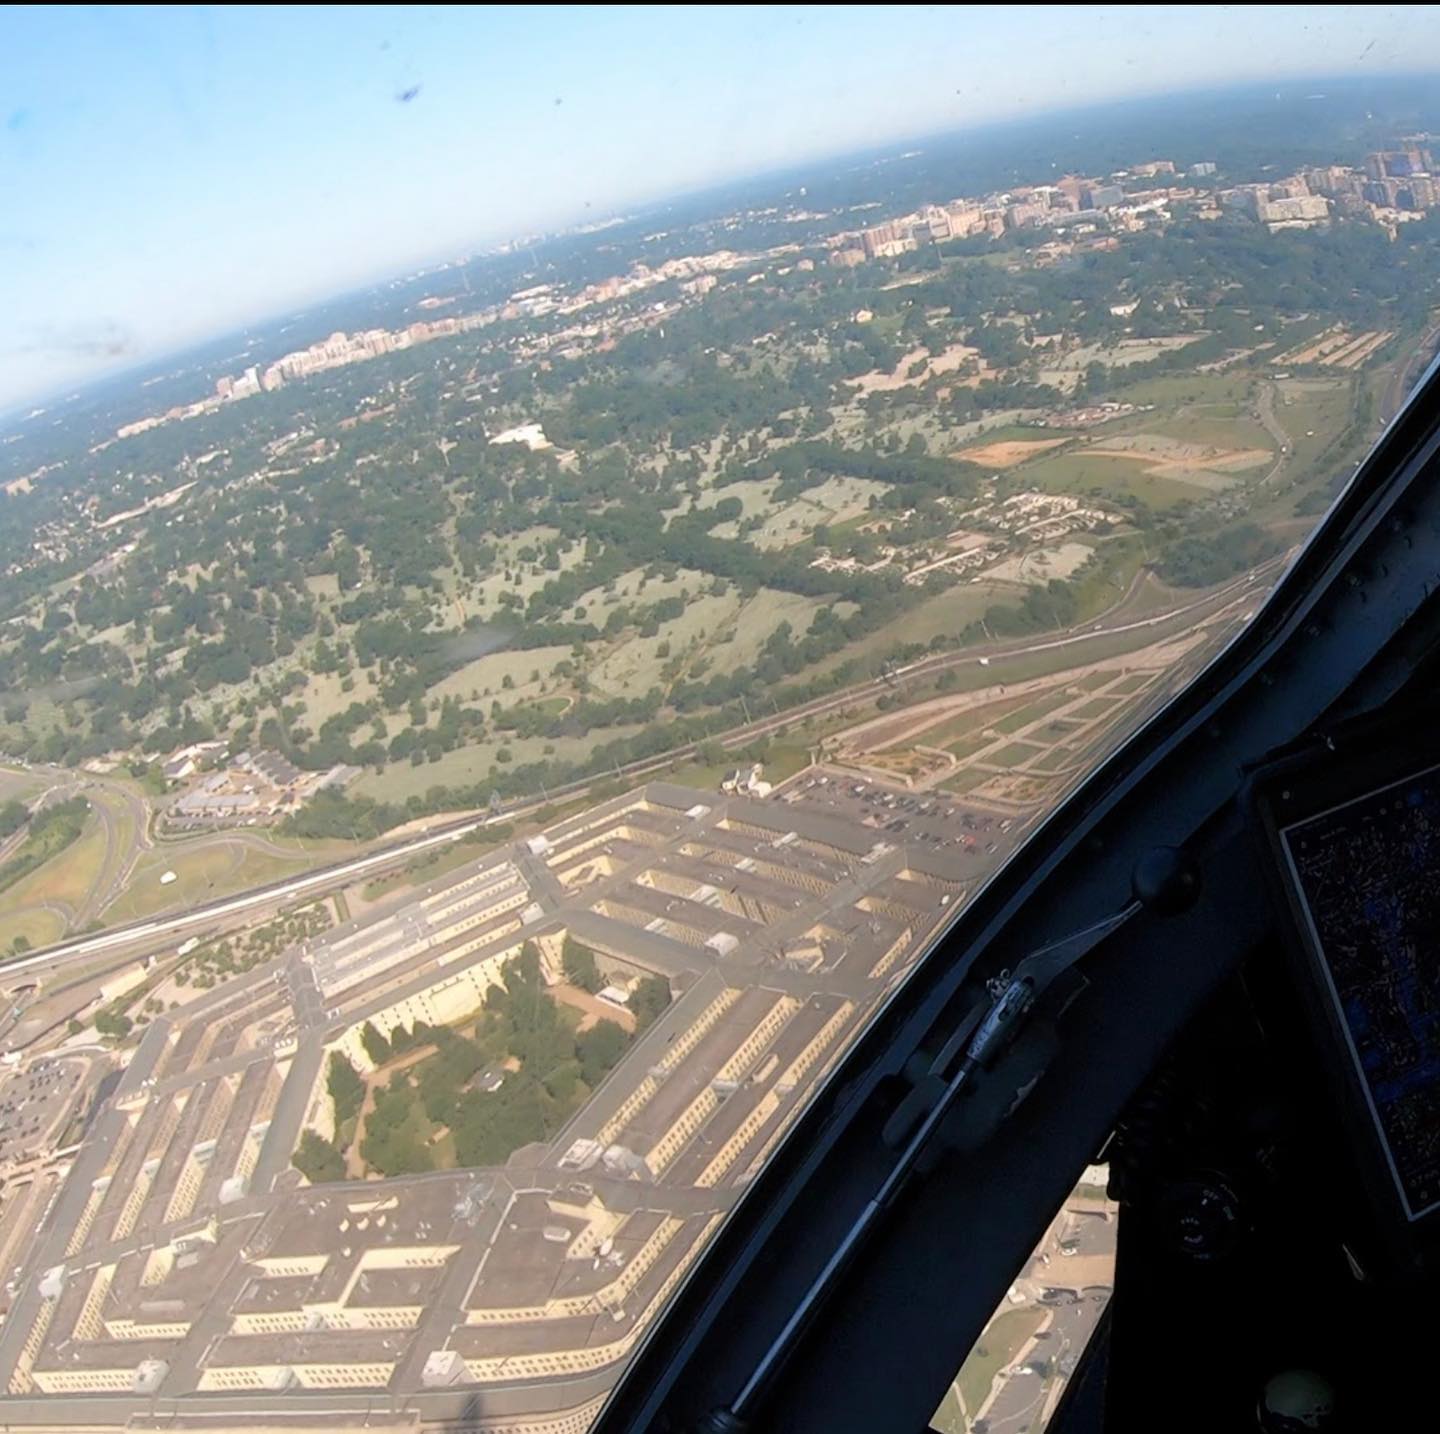 One of the flyovers this morning at Arlington Cemetery. DRAGO51 is a C-17a from Dover Air Force Base supporting a service for a POW/MIA from Vietnam. Arlington Media monitors and works closely with the military to capture these amazing and unique angles for families.